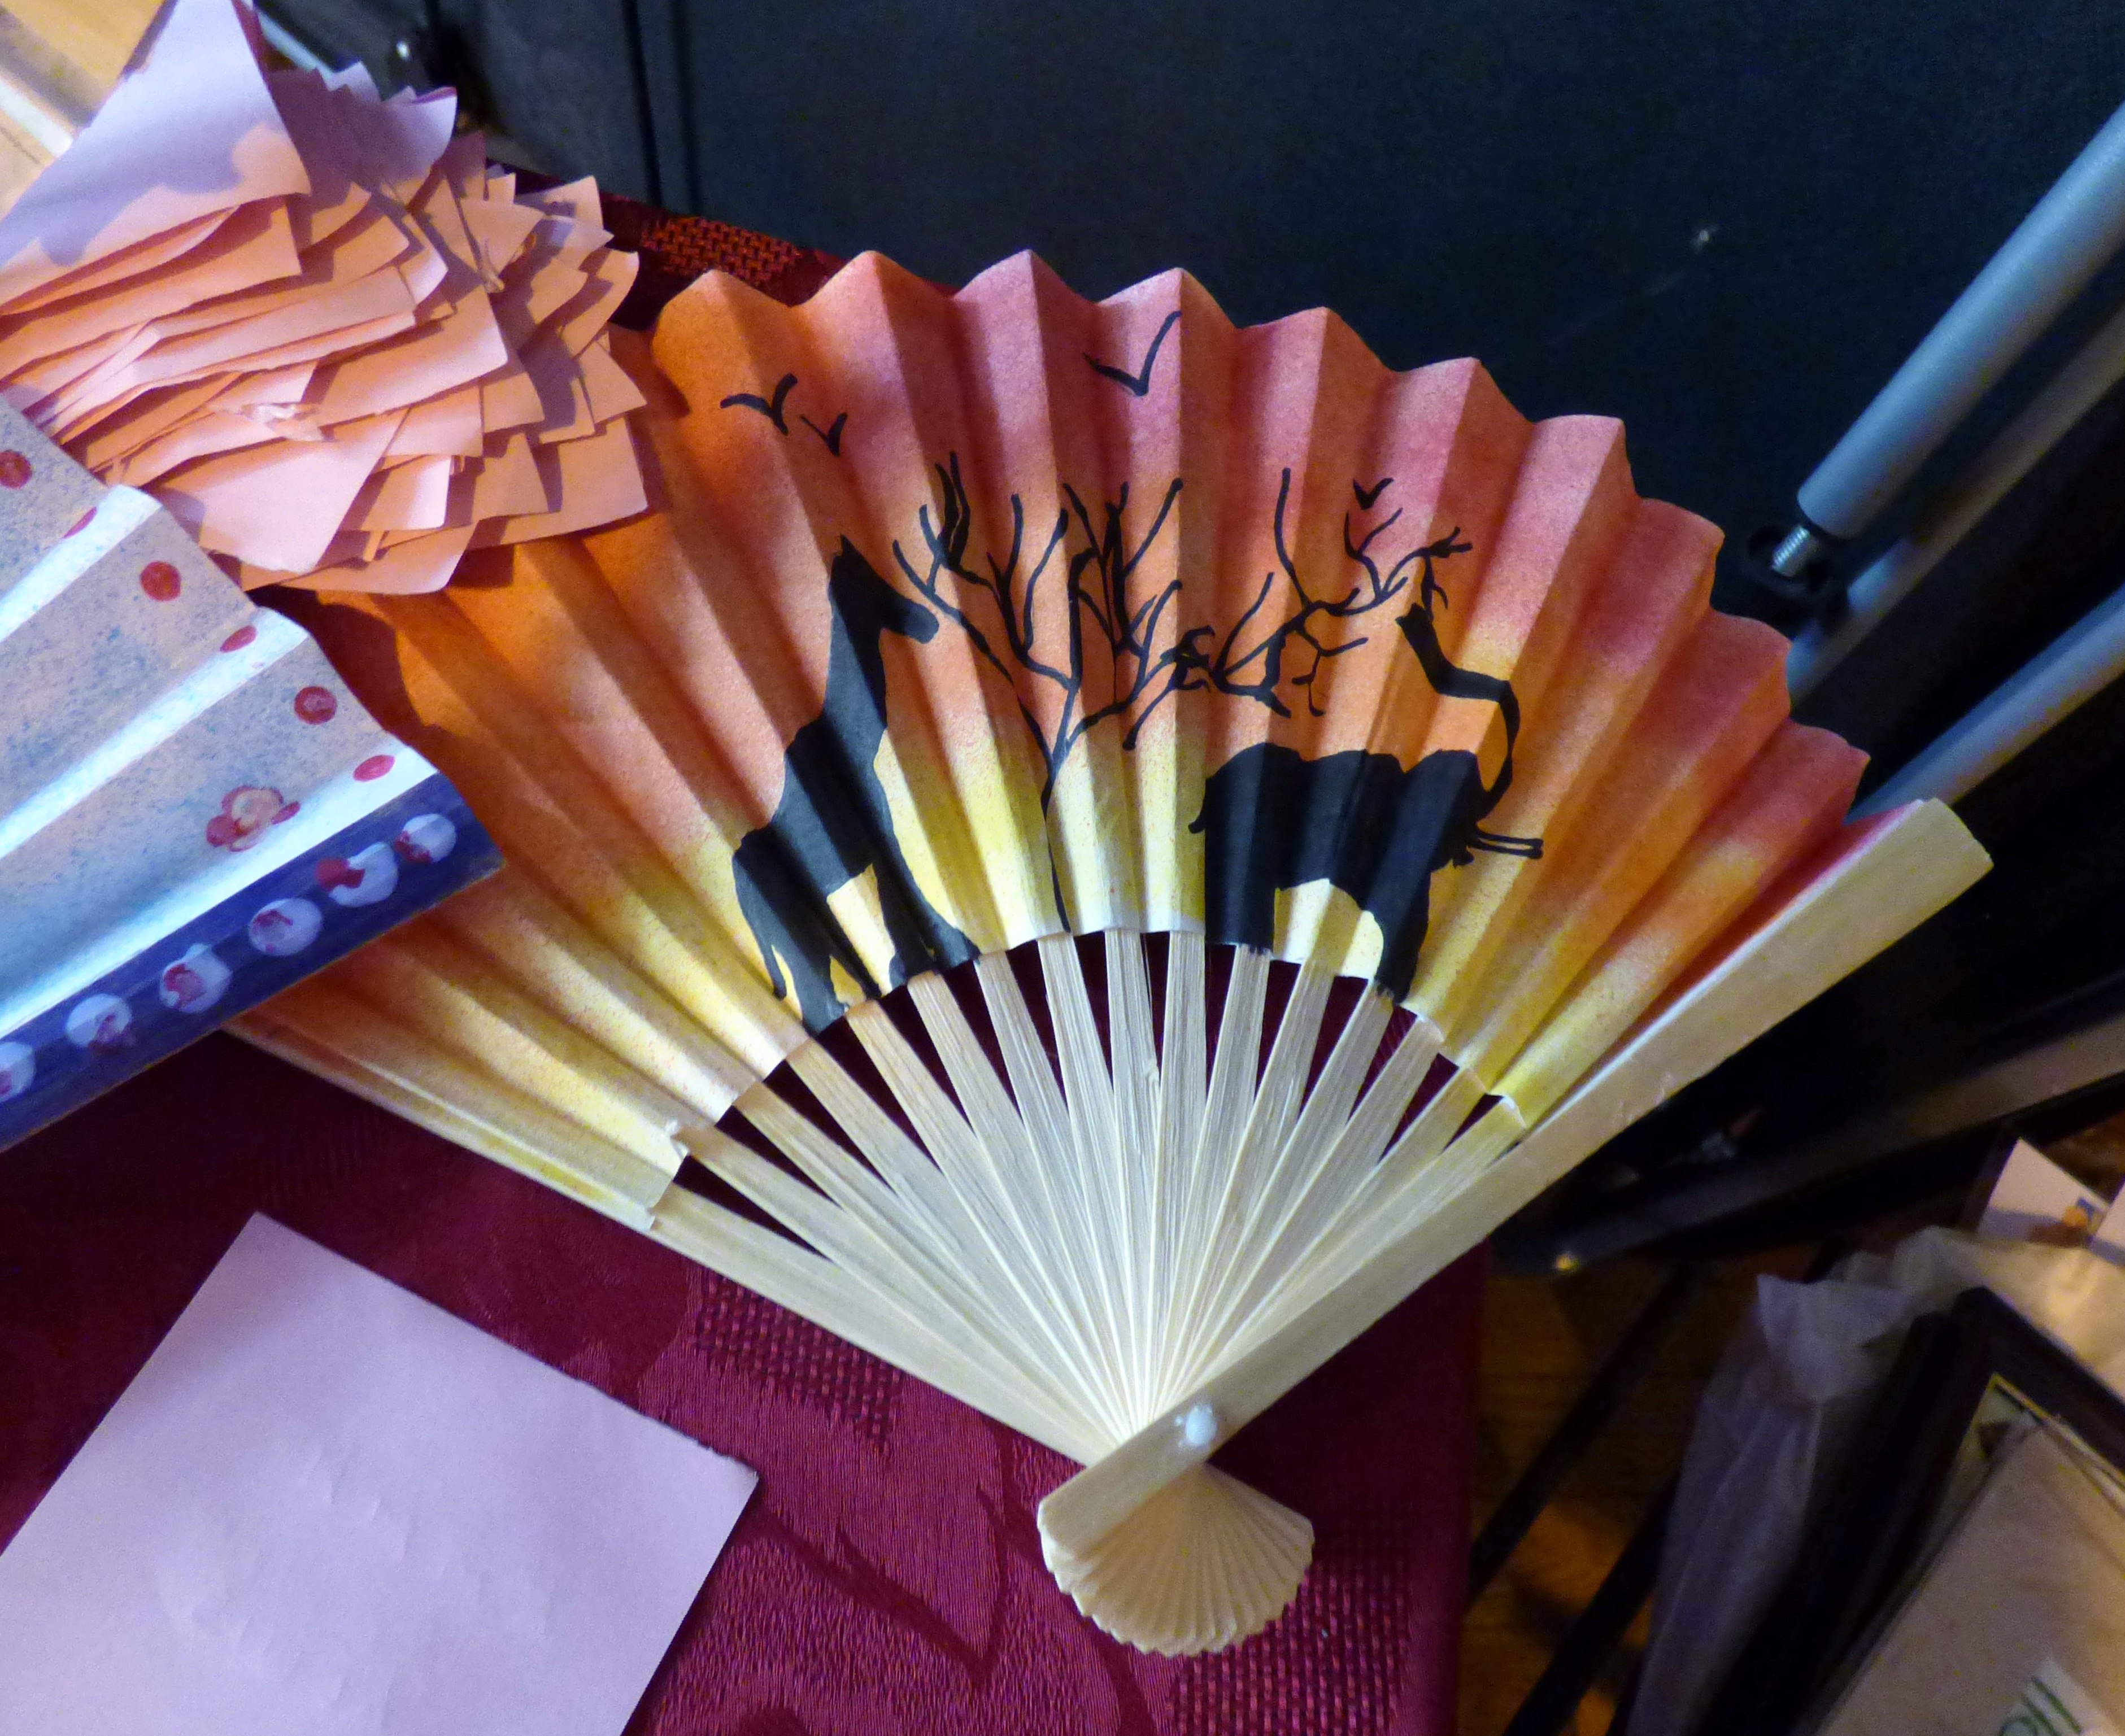 entry to "Decorate a Fan" competition for YE members at MEG Summer Tea Party 2016